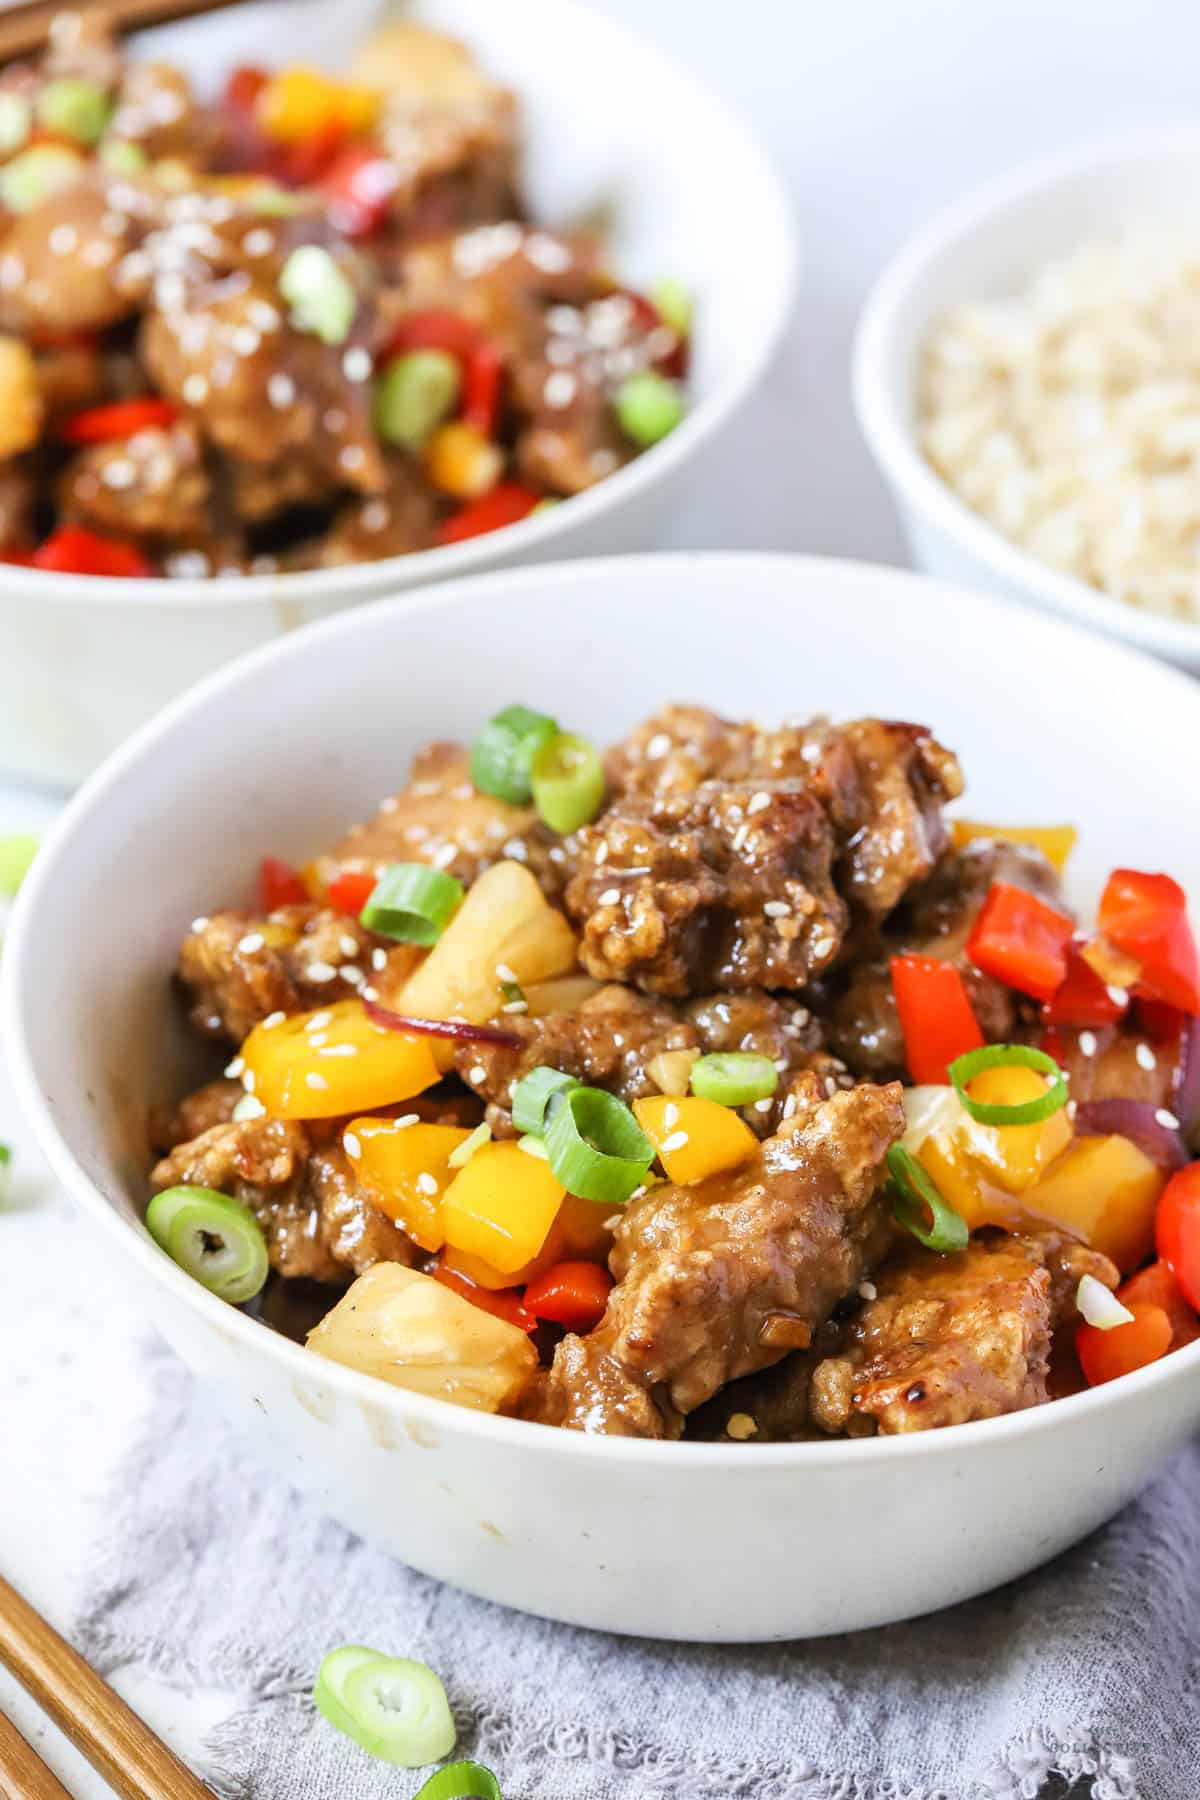 battered pork and vegetables in a bowl with sweet and sour sauce